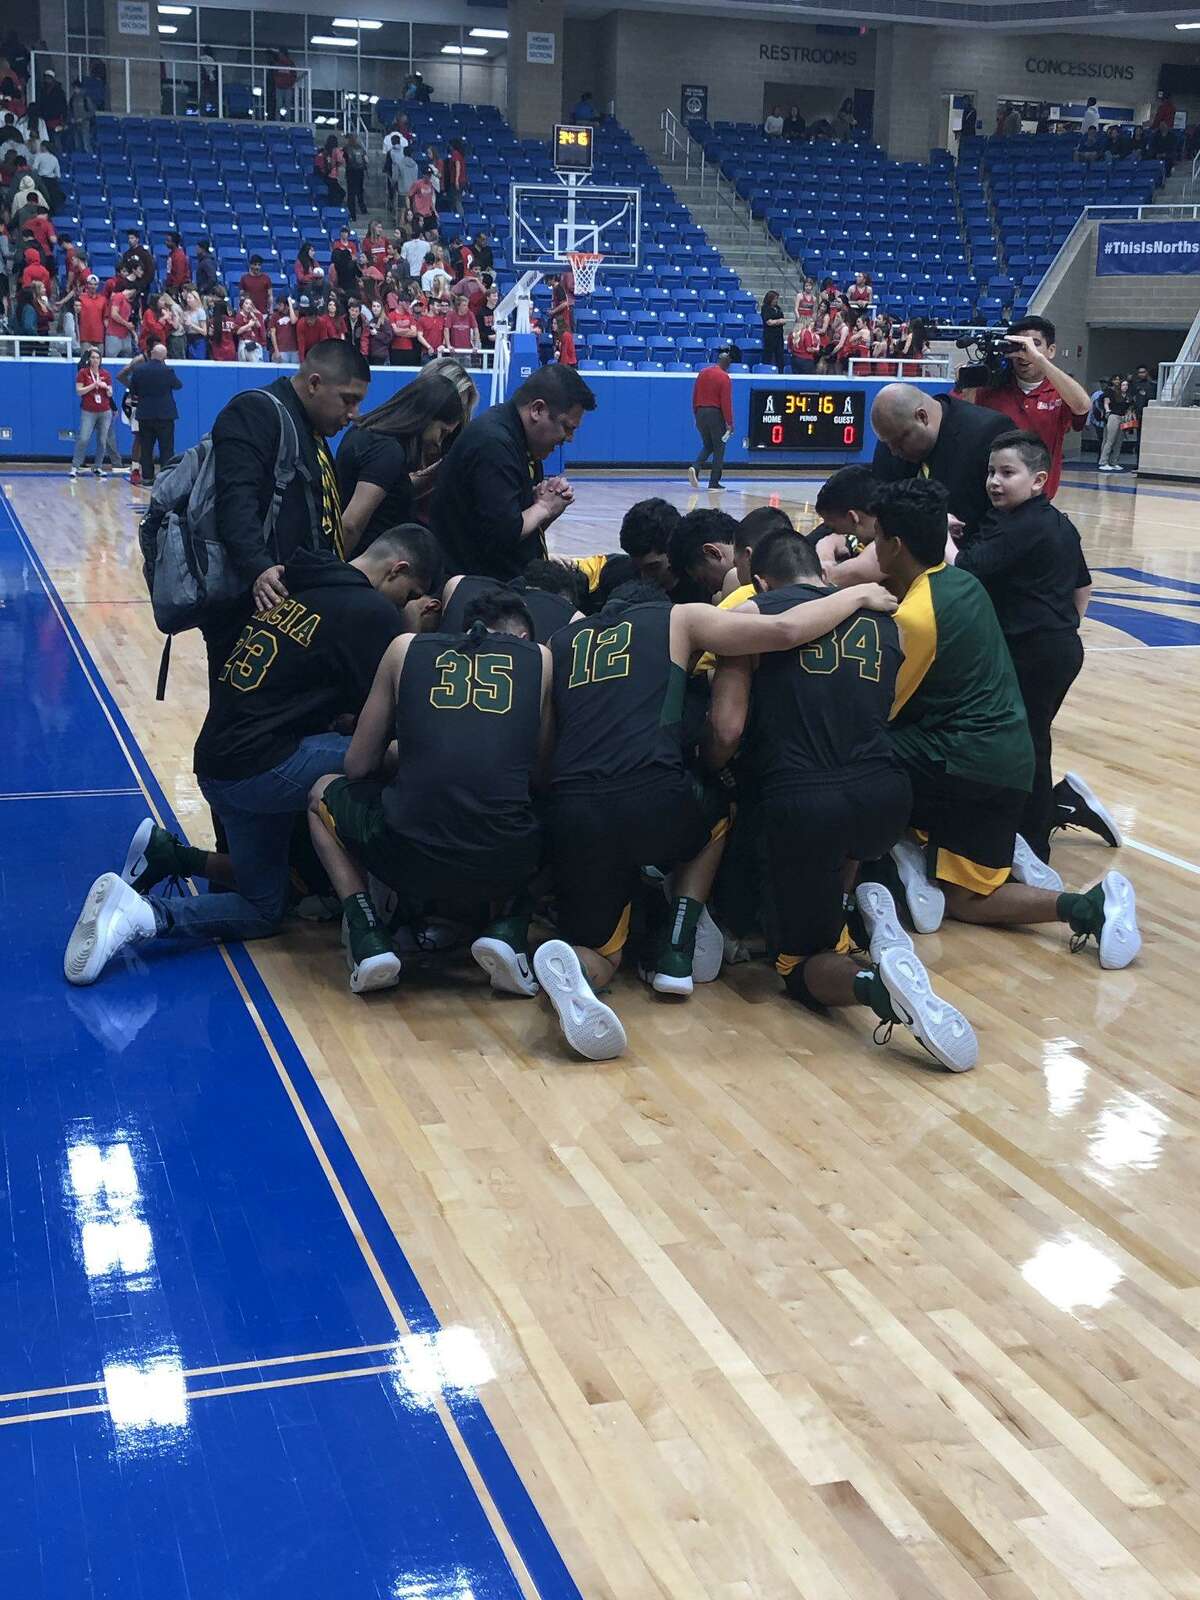 Nixon advanced to the regional finals for the second straight season in its first year in 6A winning 74-72 Friday against Austin Bowie at the Northside Sports Gym in San Antonio.